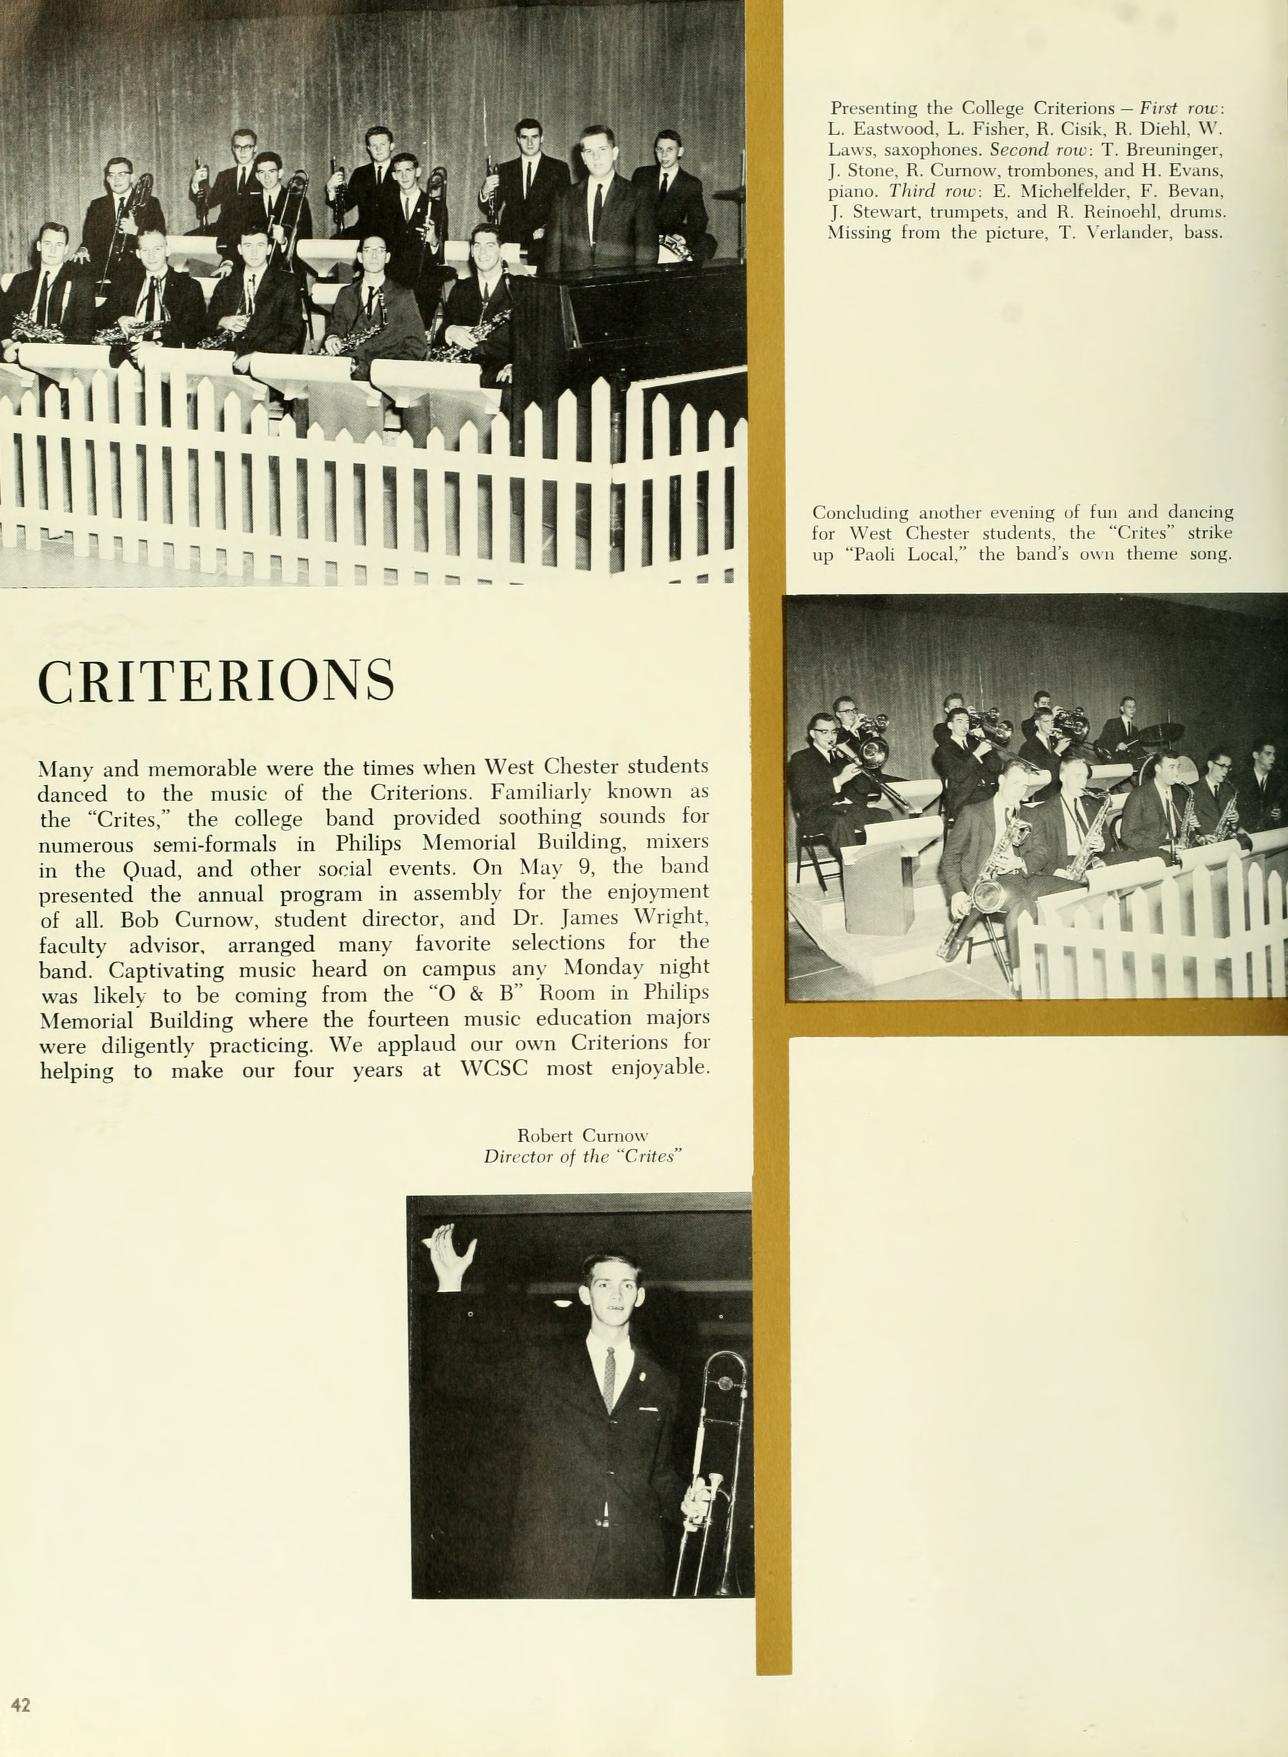   42 CRITERIONS Many and memorable were the times when West Chester students danced to the music of the Criterions Familiarly known as the "Crites," the college band provided soothing sounds for numerous semi-formals in Philips Memorial Building, mixers in the Quad, and other social events. On May 9, the band presented the annual program in assembly for the enjoyment of all. Bob Curnow, student director, and Dr. James Wright, faculty advisor, arranged many favorite selections for the band Captivating music heard on campus any Monday night was likely to be coming from the "O & B" Room in Philips Memorial Building where the fourteen music education majors were diligently practicing. We applaud our own Criterions for helping to make our four years at WCSC most enjoyable. Robert Curnow Director of the "C" Presenting the College Criterion-First o L. Eastwood, L. Fiber, R. Cisk, R. Diehl, W Laws, saxophones Second row T. Beuninger, J. Stone, R. Crow, tromboos, and H. Evans Third E. Michellelder, F. Becan, J Stewart, trungets, and R. Brineeld, ma Mining from the picture, T. Verlander, bass Coocuting the evening of fun and dancing for West Chester students the "Crites strike up "Toli Local," the band's on theme song